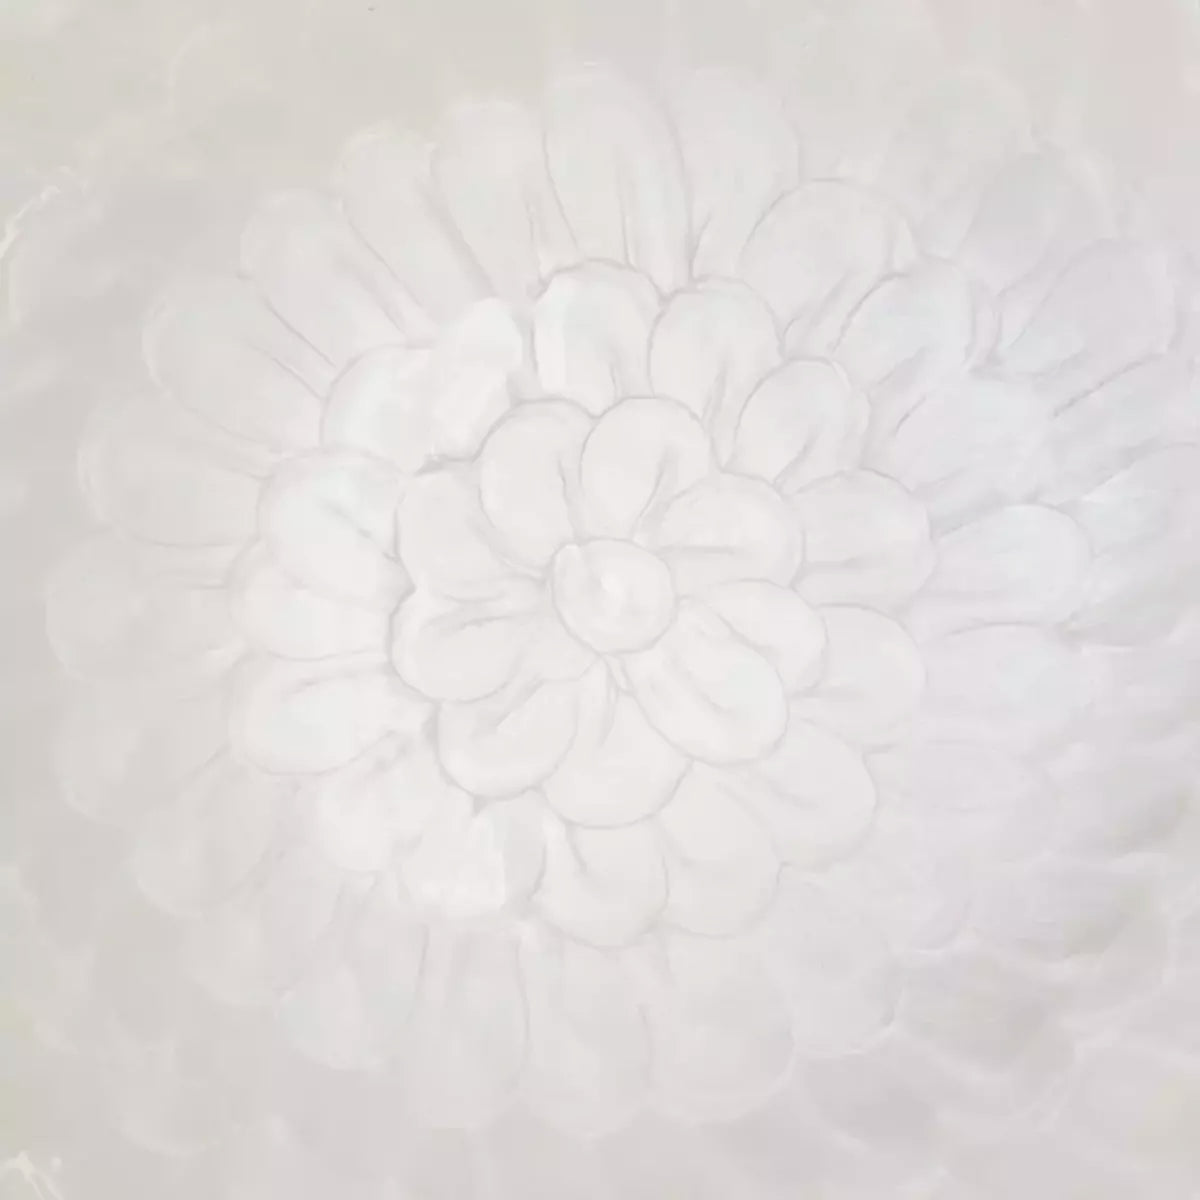 An enamel coated white j.elliot Como Salad Bowl with an embossed pearl design.